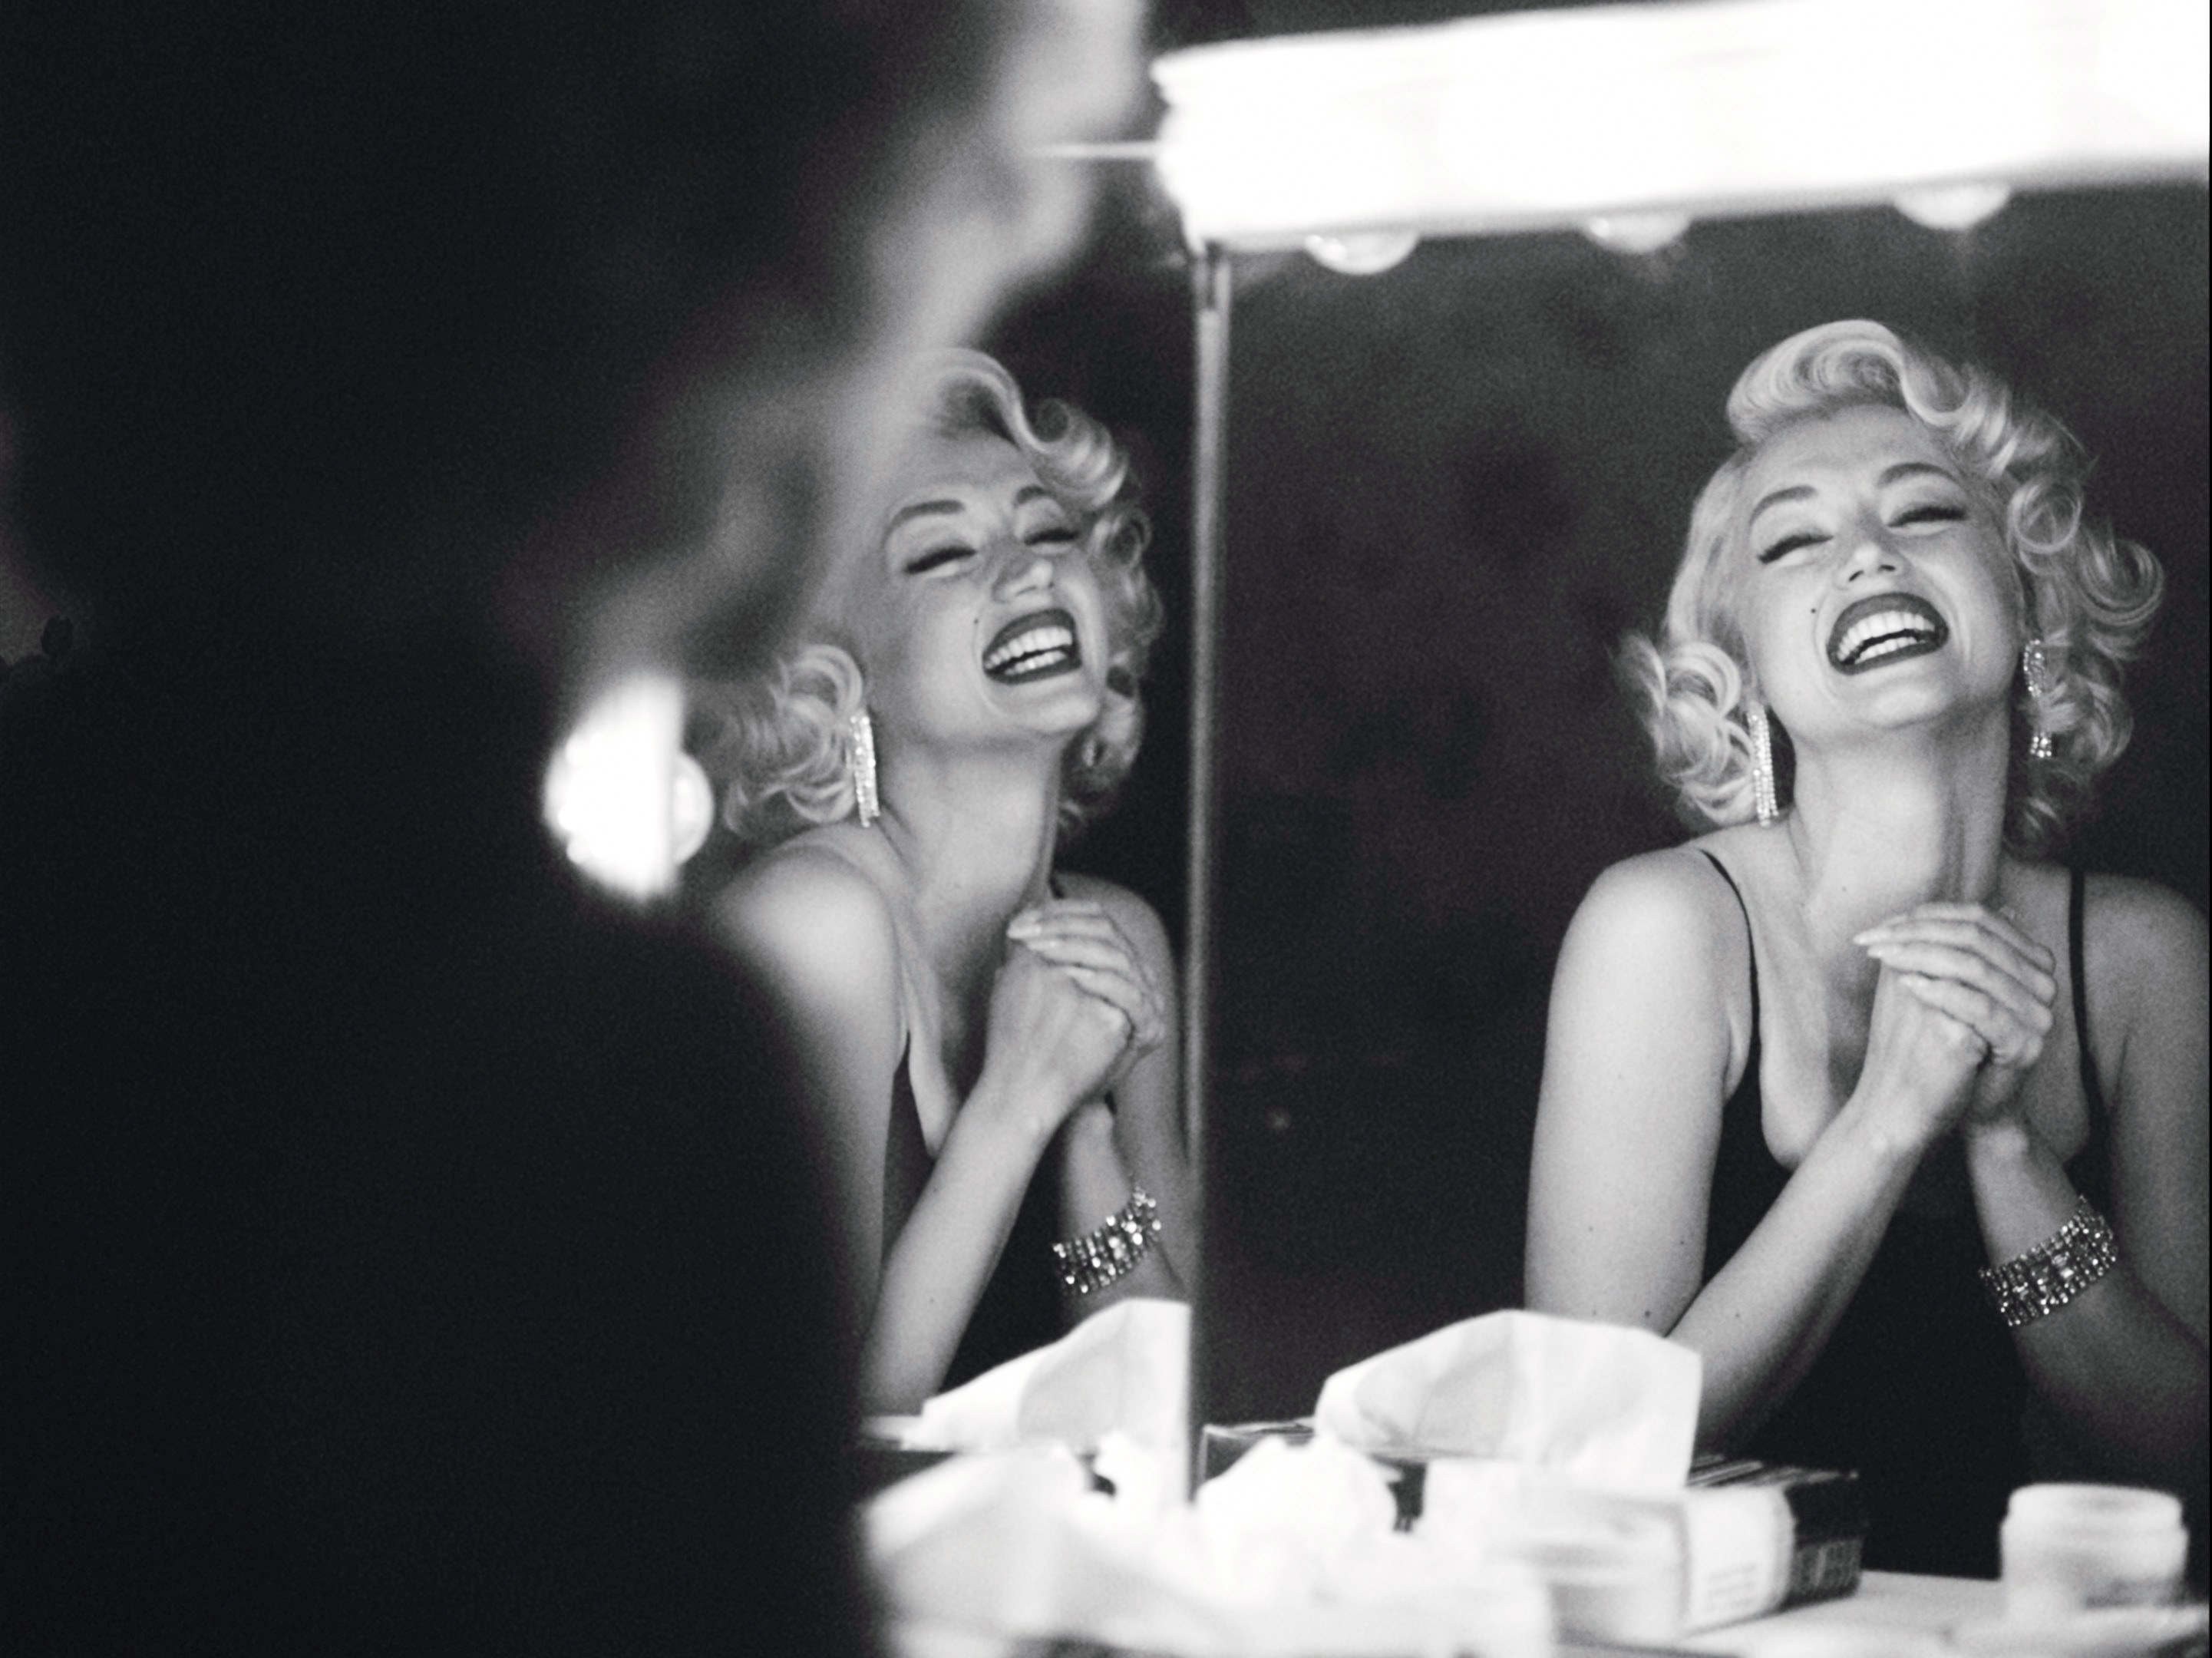 A woman laughs at her own reflection